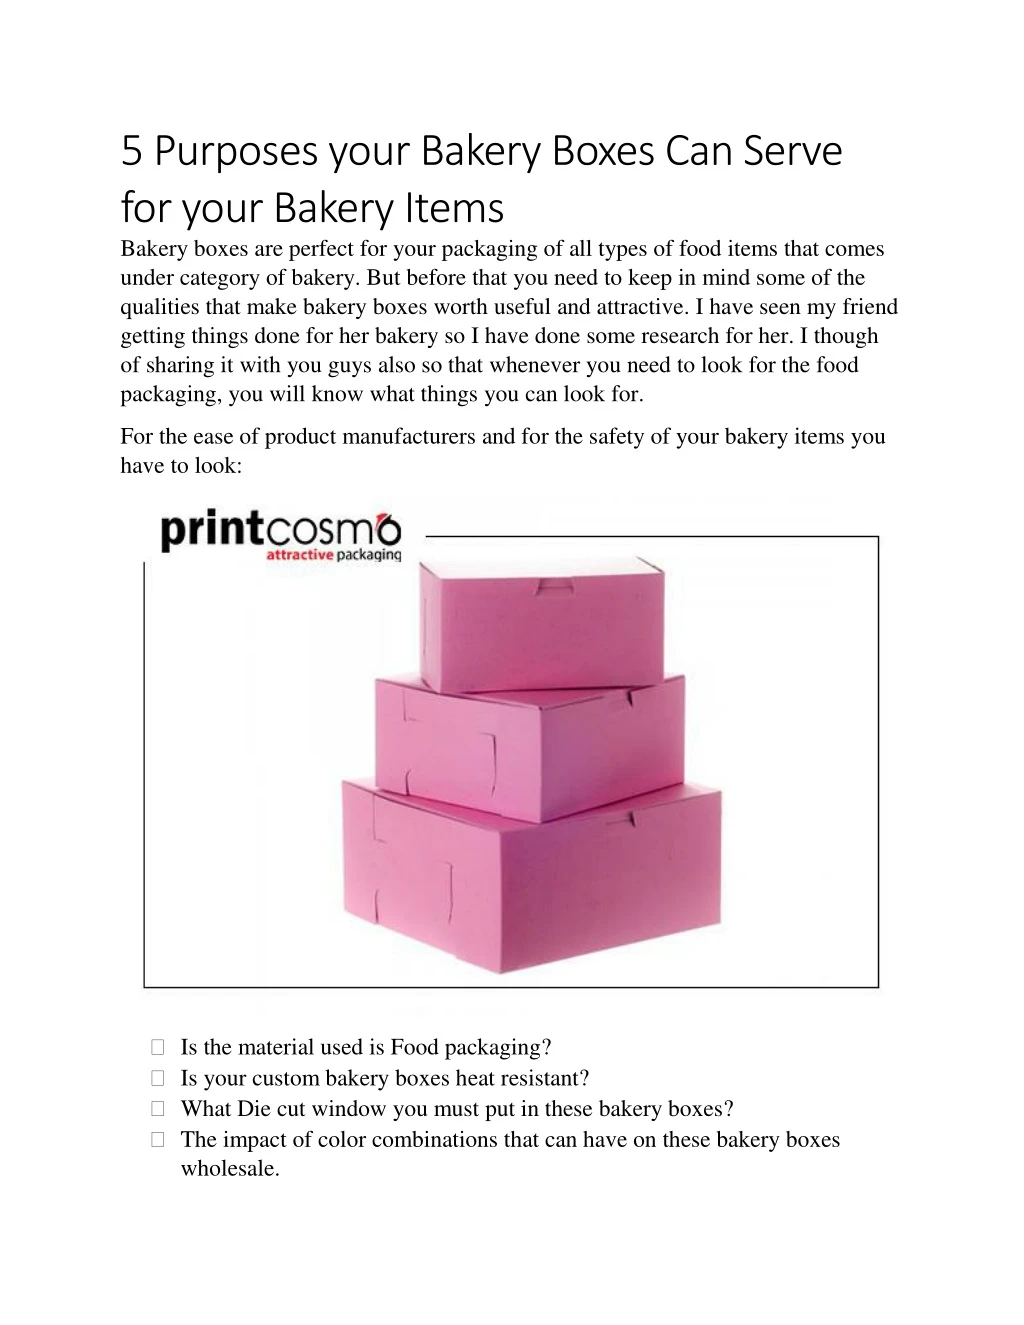 5 purposes your bakery boxes can serve for your